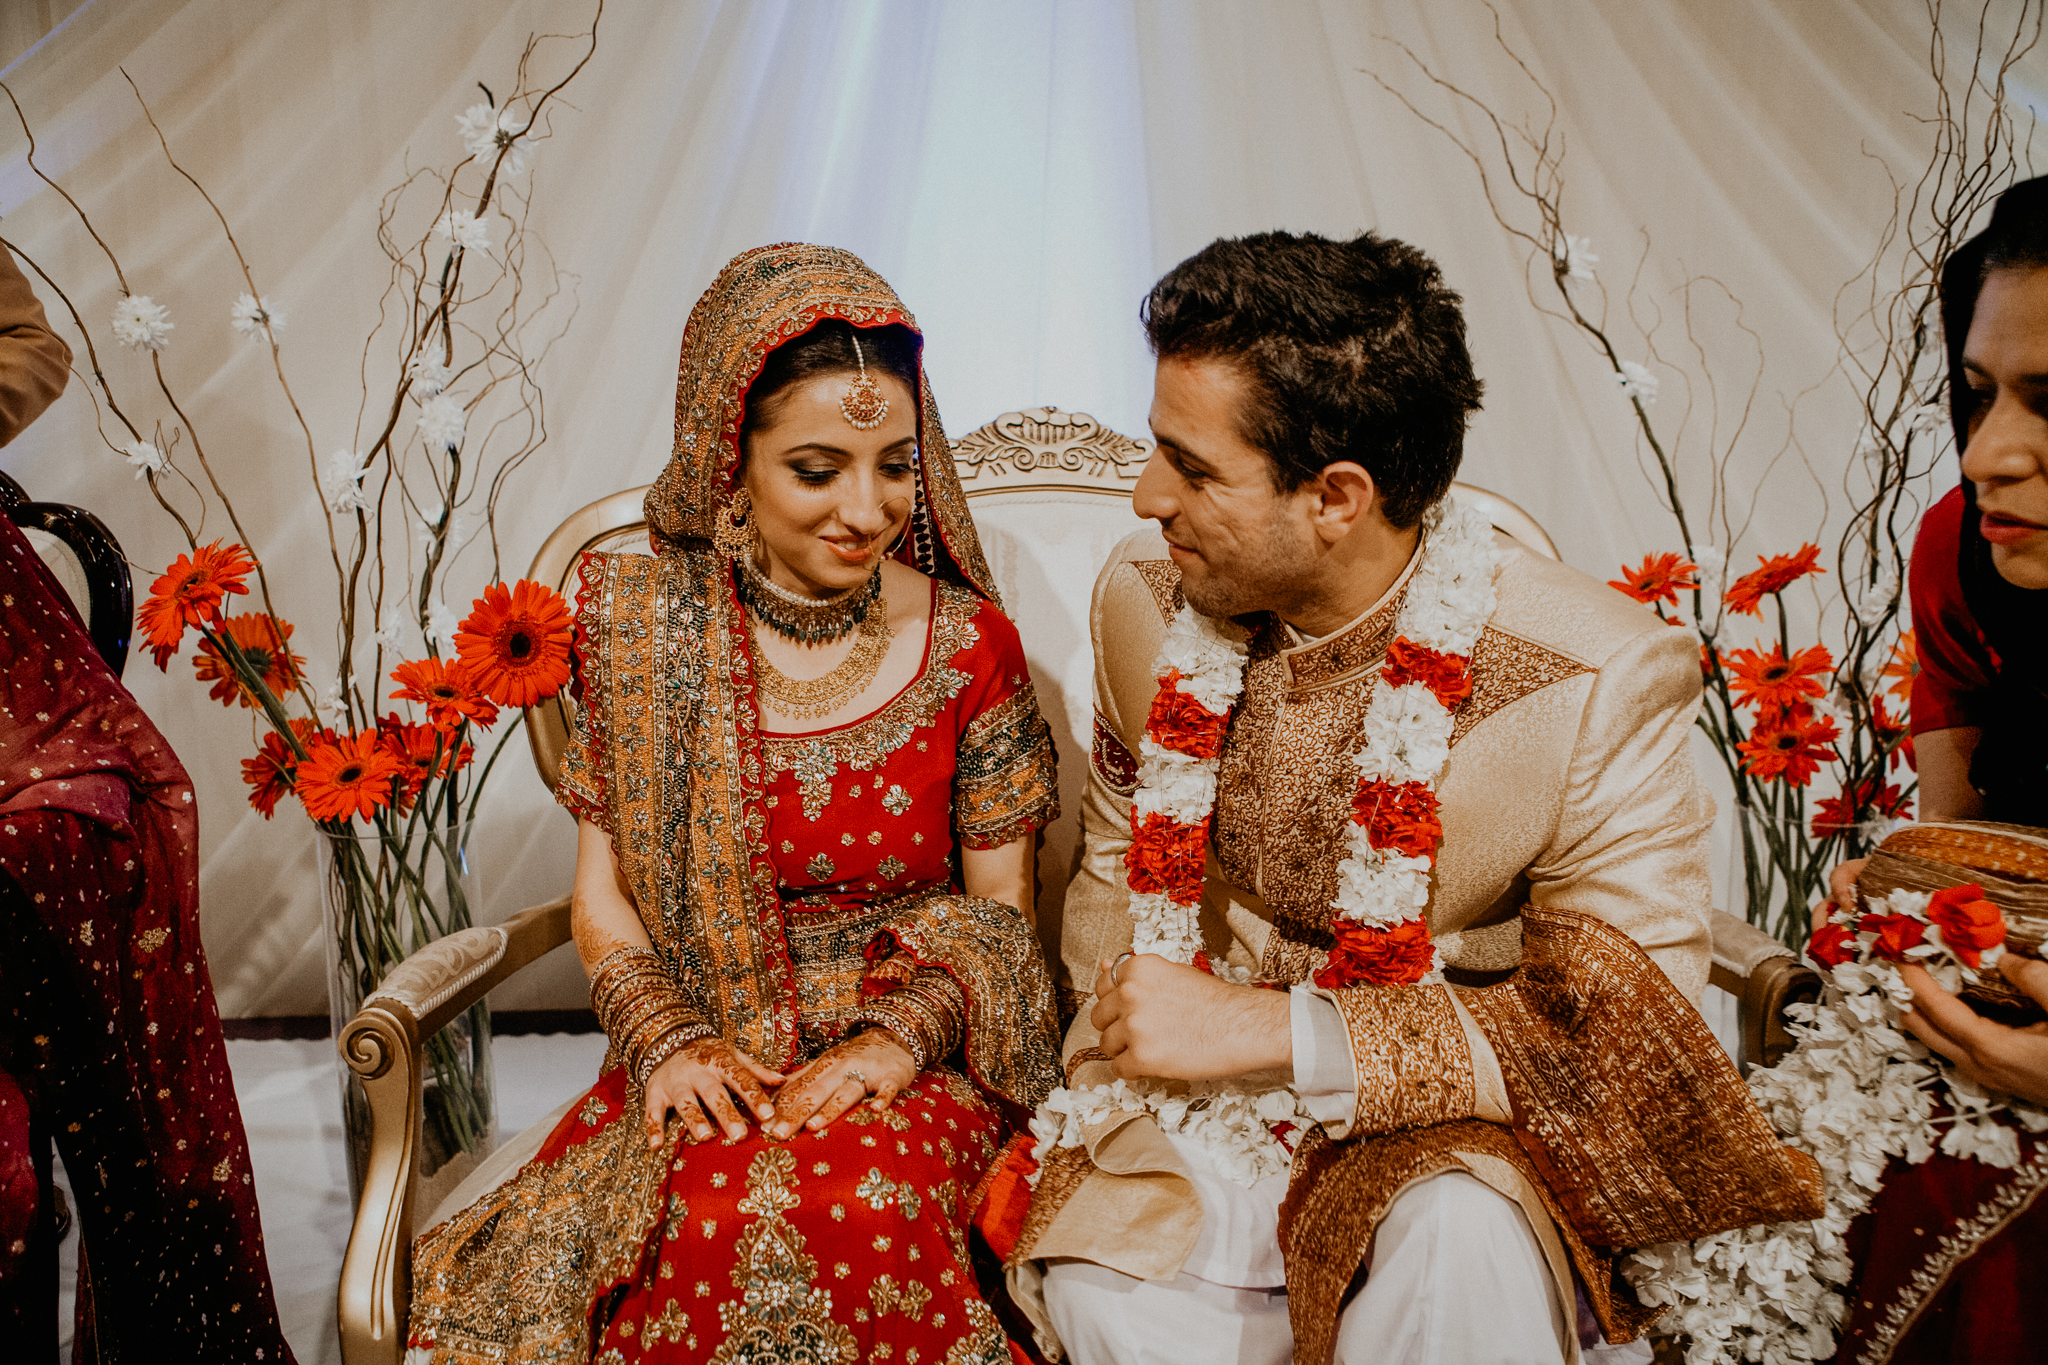 Bride and groom exchange rings at Mehndi ceremony Indian wedding photograph Minneapolis MN